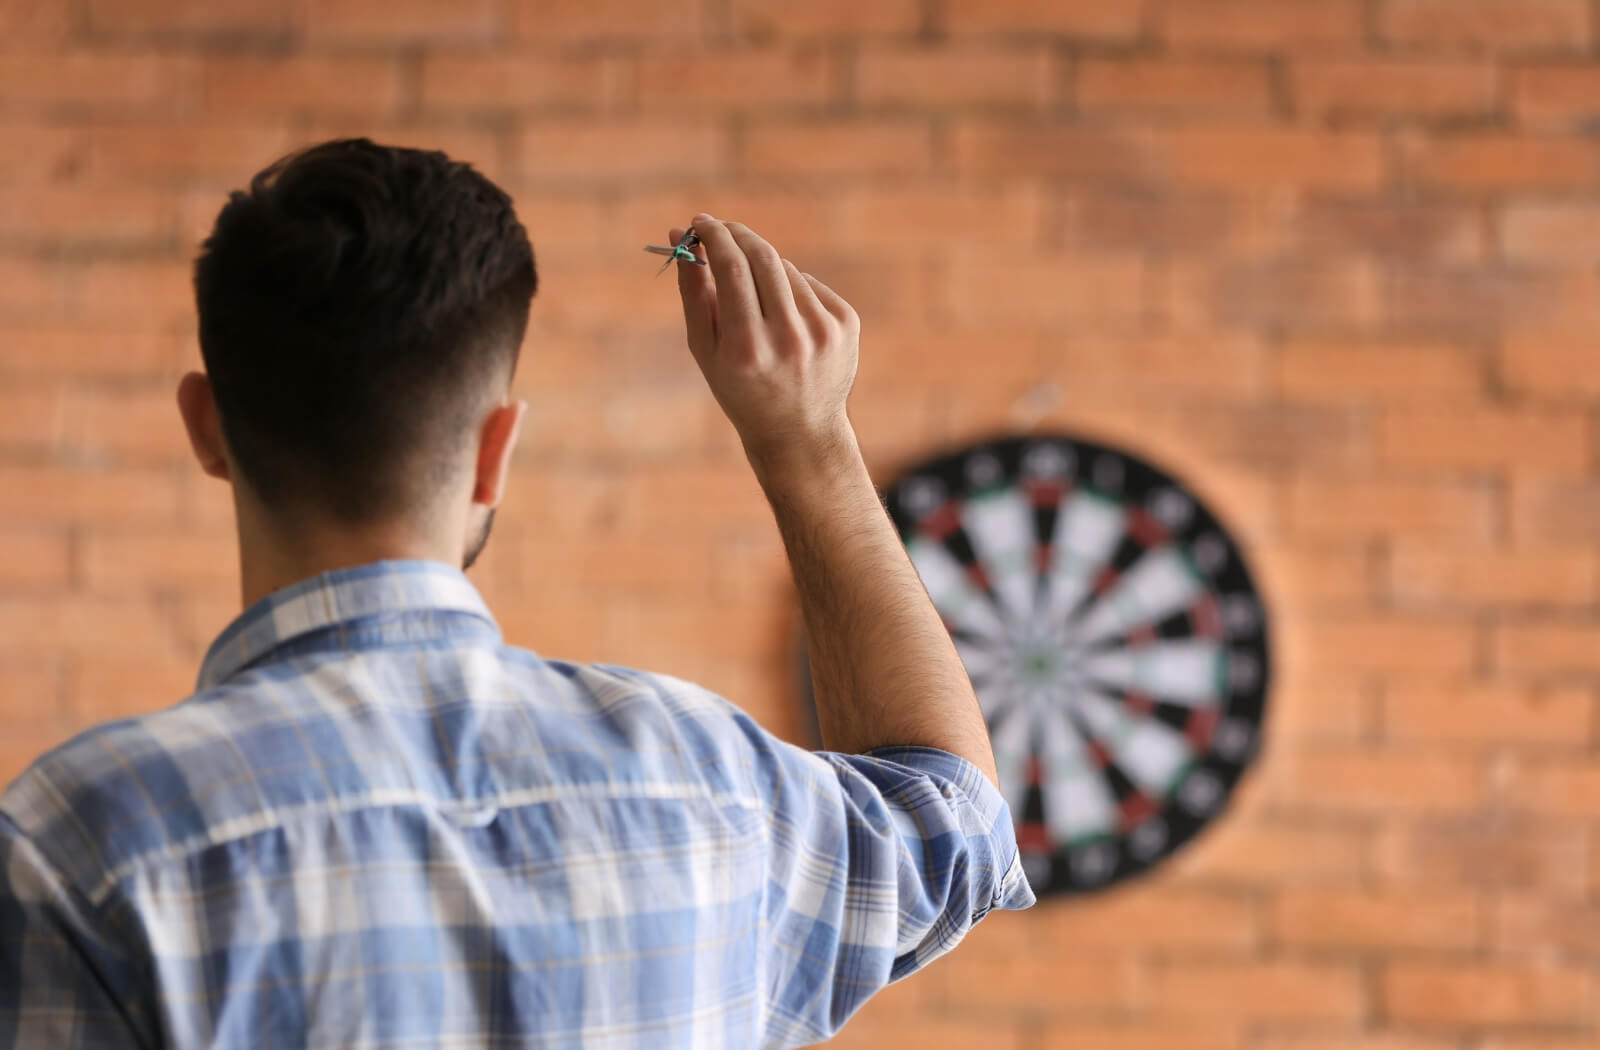 A man playing darts, a sport that requires good hand-eye coordination.